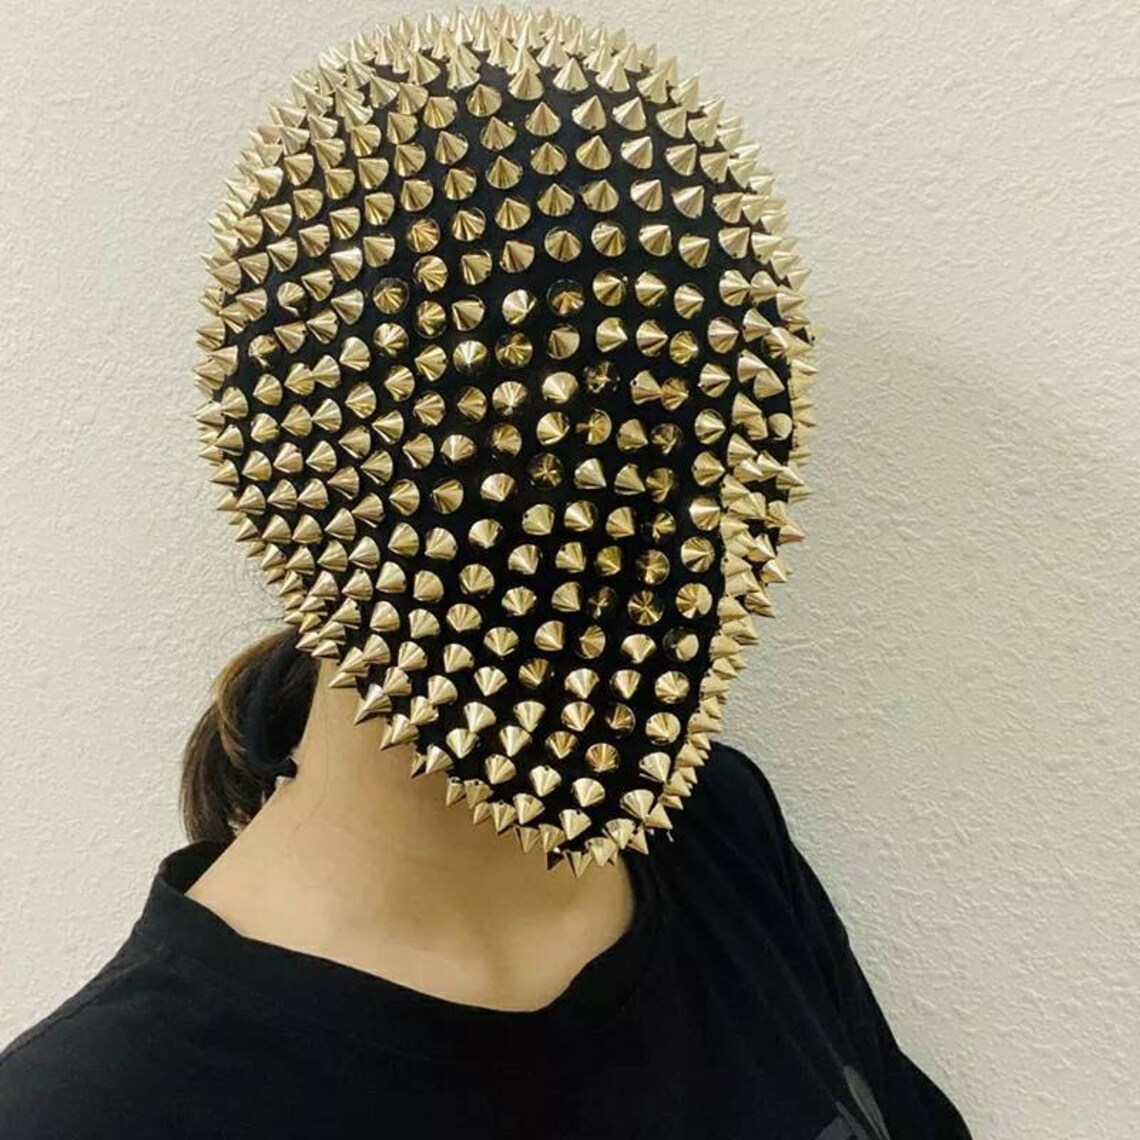 Mad Max Silver / Gold Studded Spikes Full Face Margiela Mask | Etsy